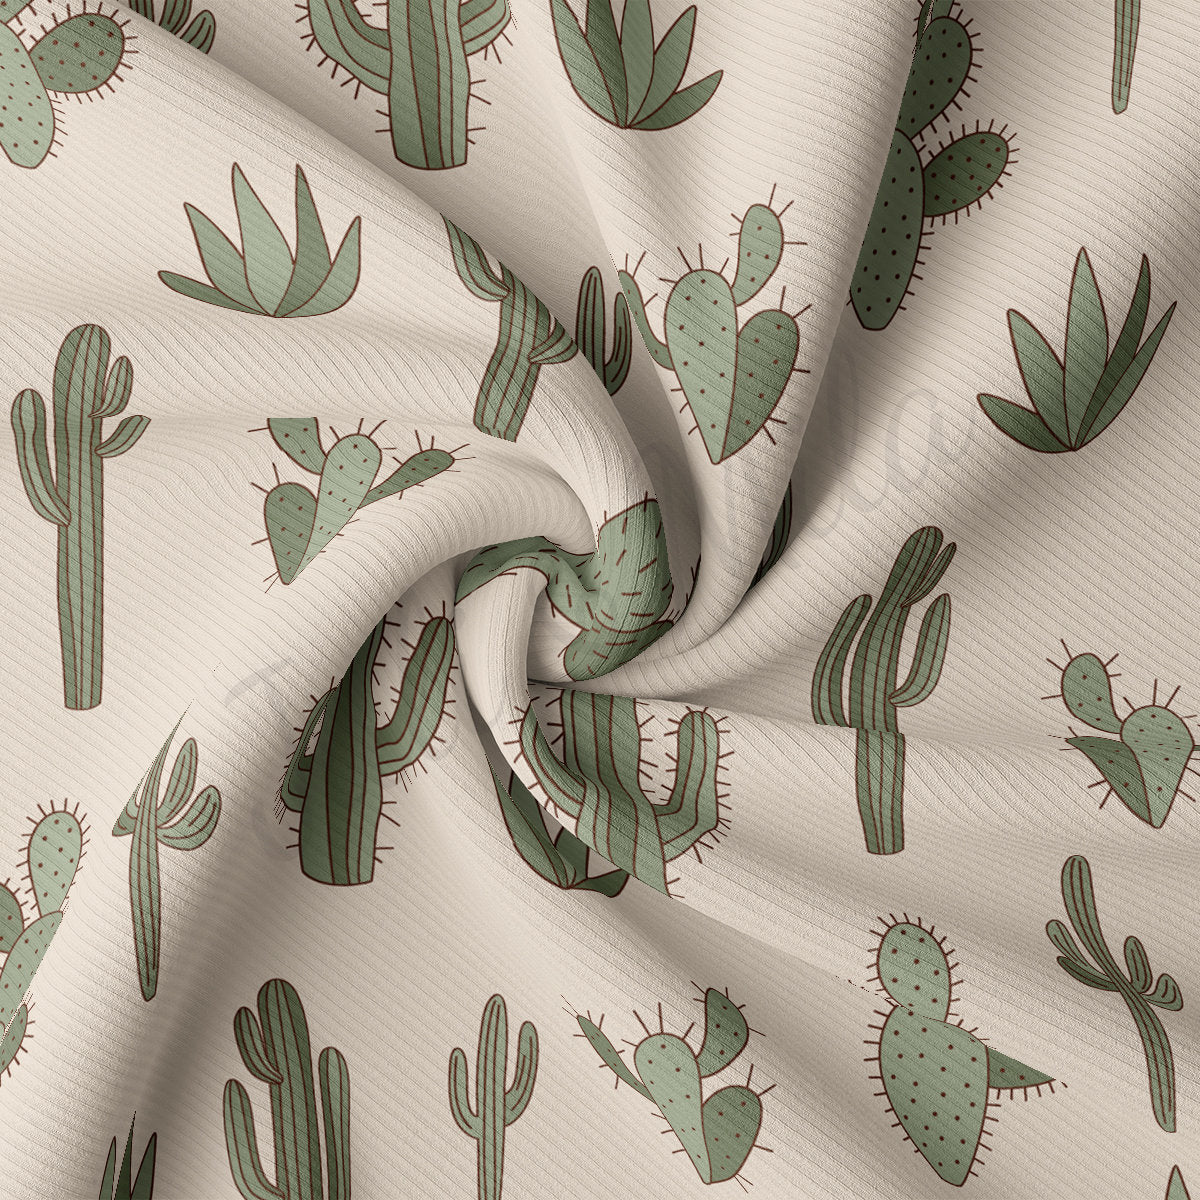 Boho Cactus Rib Knit Fabric by the Yard Ribbed Jersey Stretchy Soft Polyester Stretch Fabric 1 Yard  RBK2162